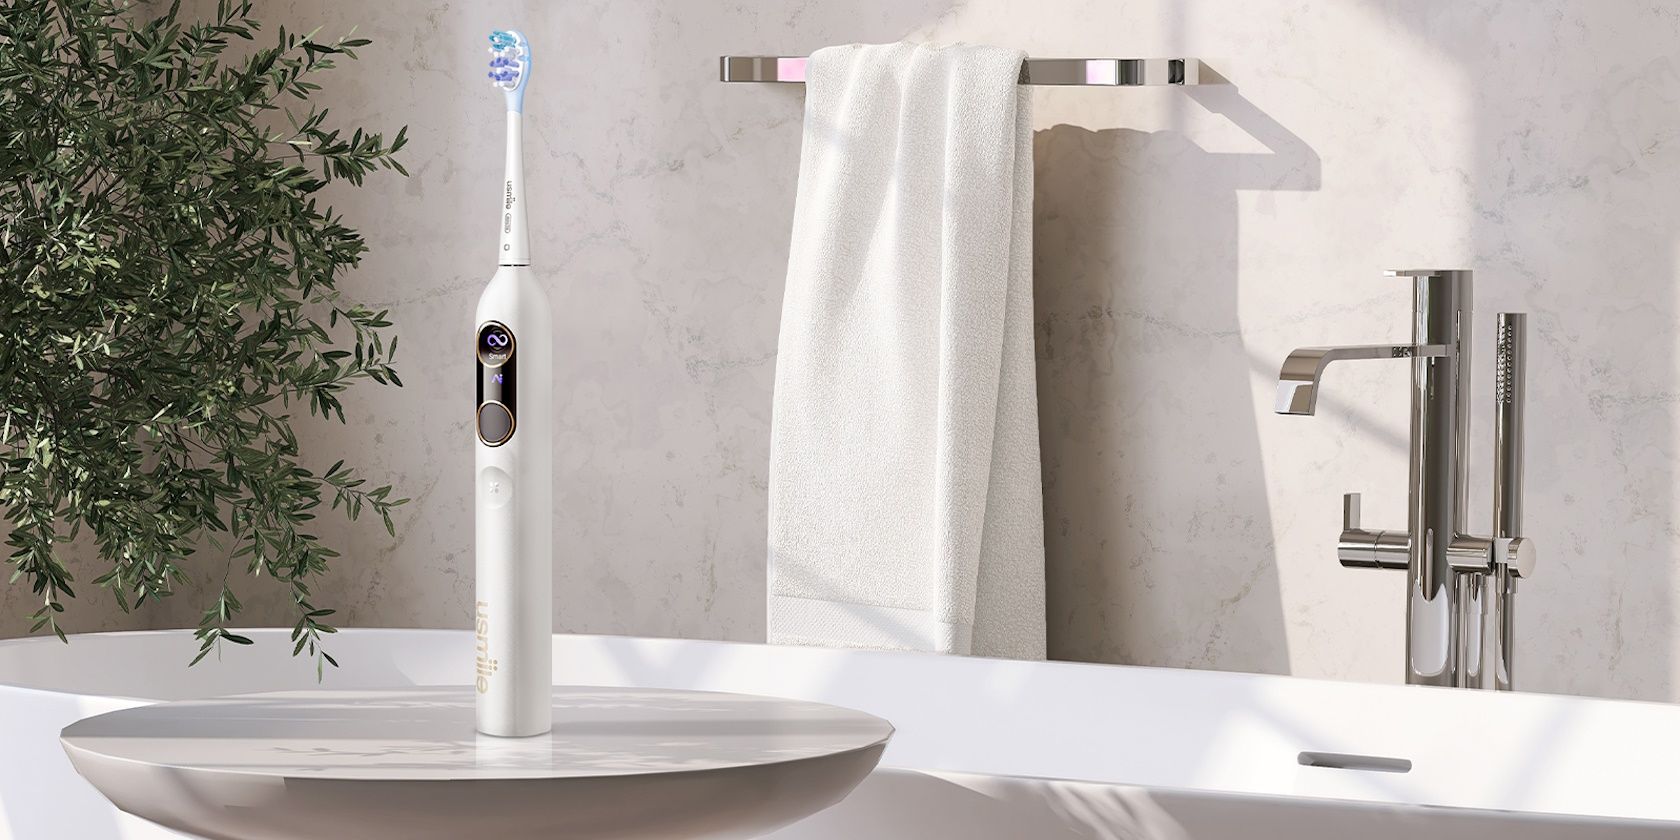 Smile Wide with usmile's Y10 Pro Smart Toothbrush Black Friday Deal